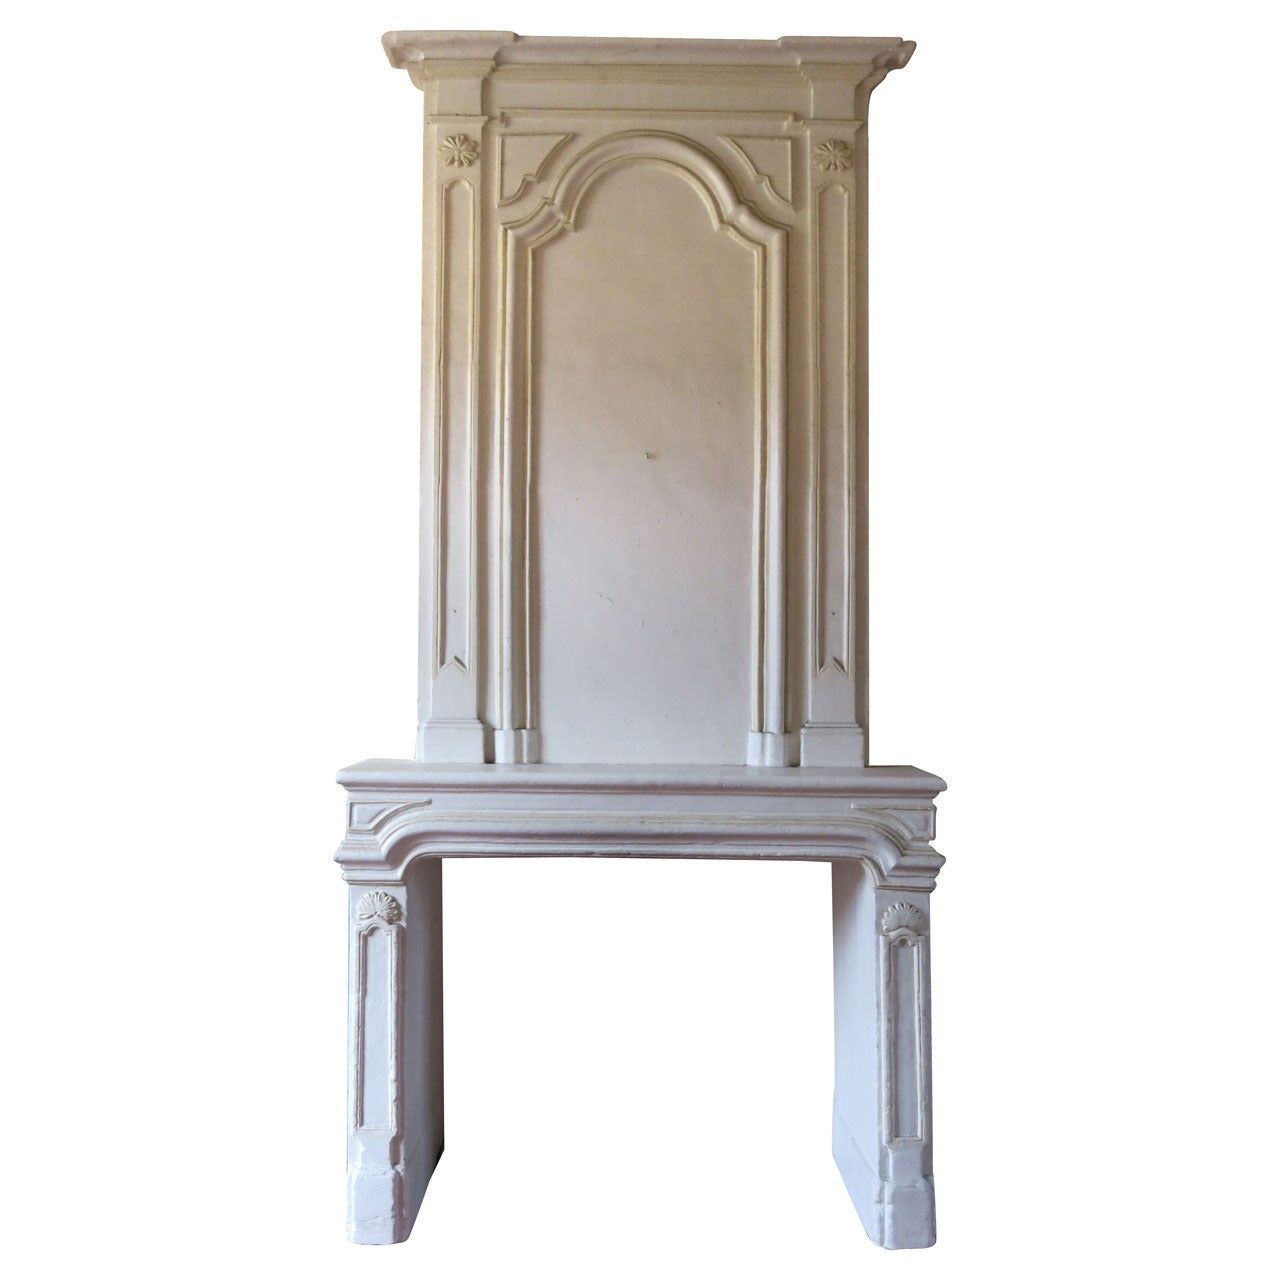 Rare Louis XIV Period 17th Century French Original Fireplace with Trumeau For Sale